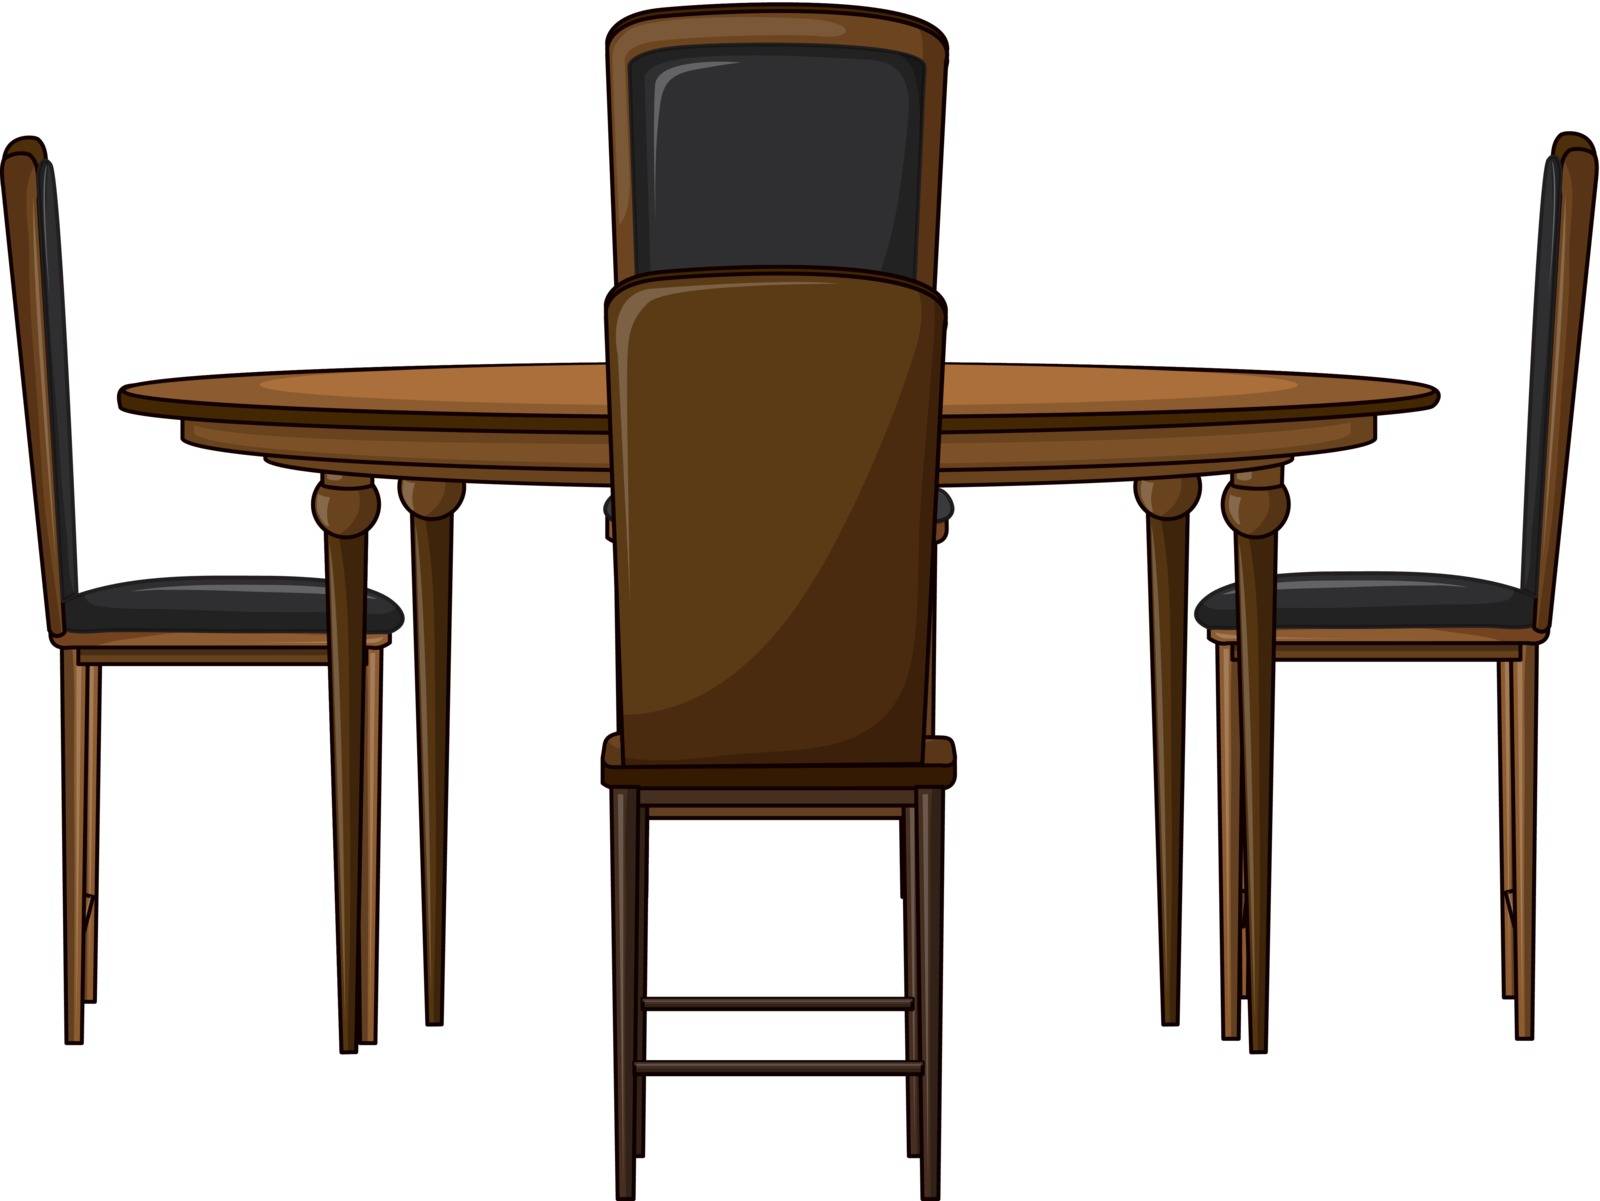 Illustration of a dinning table on a white background